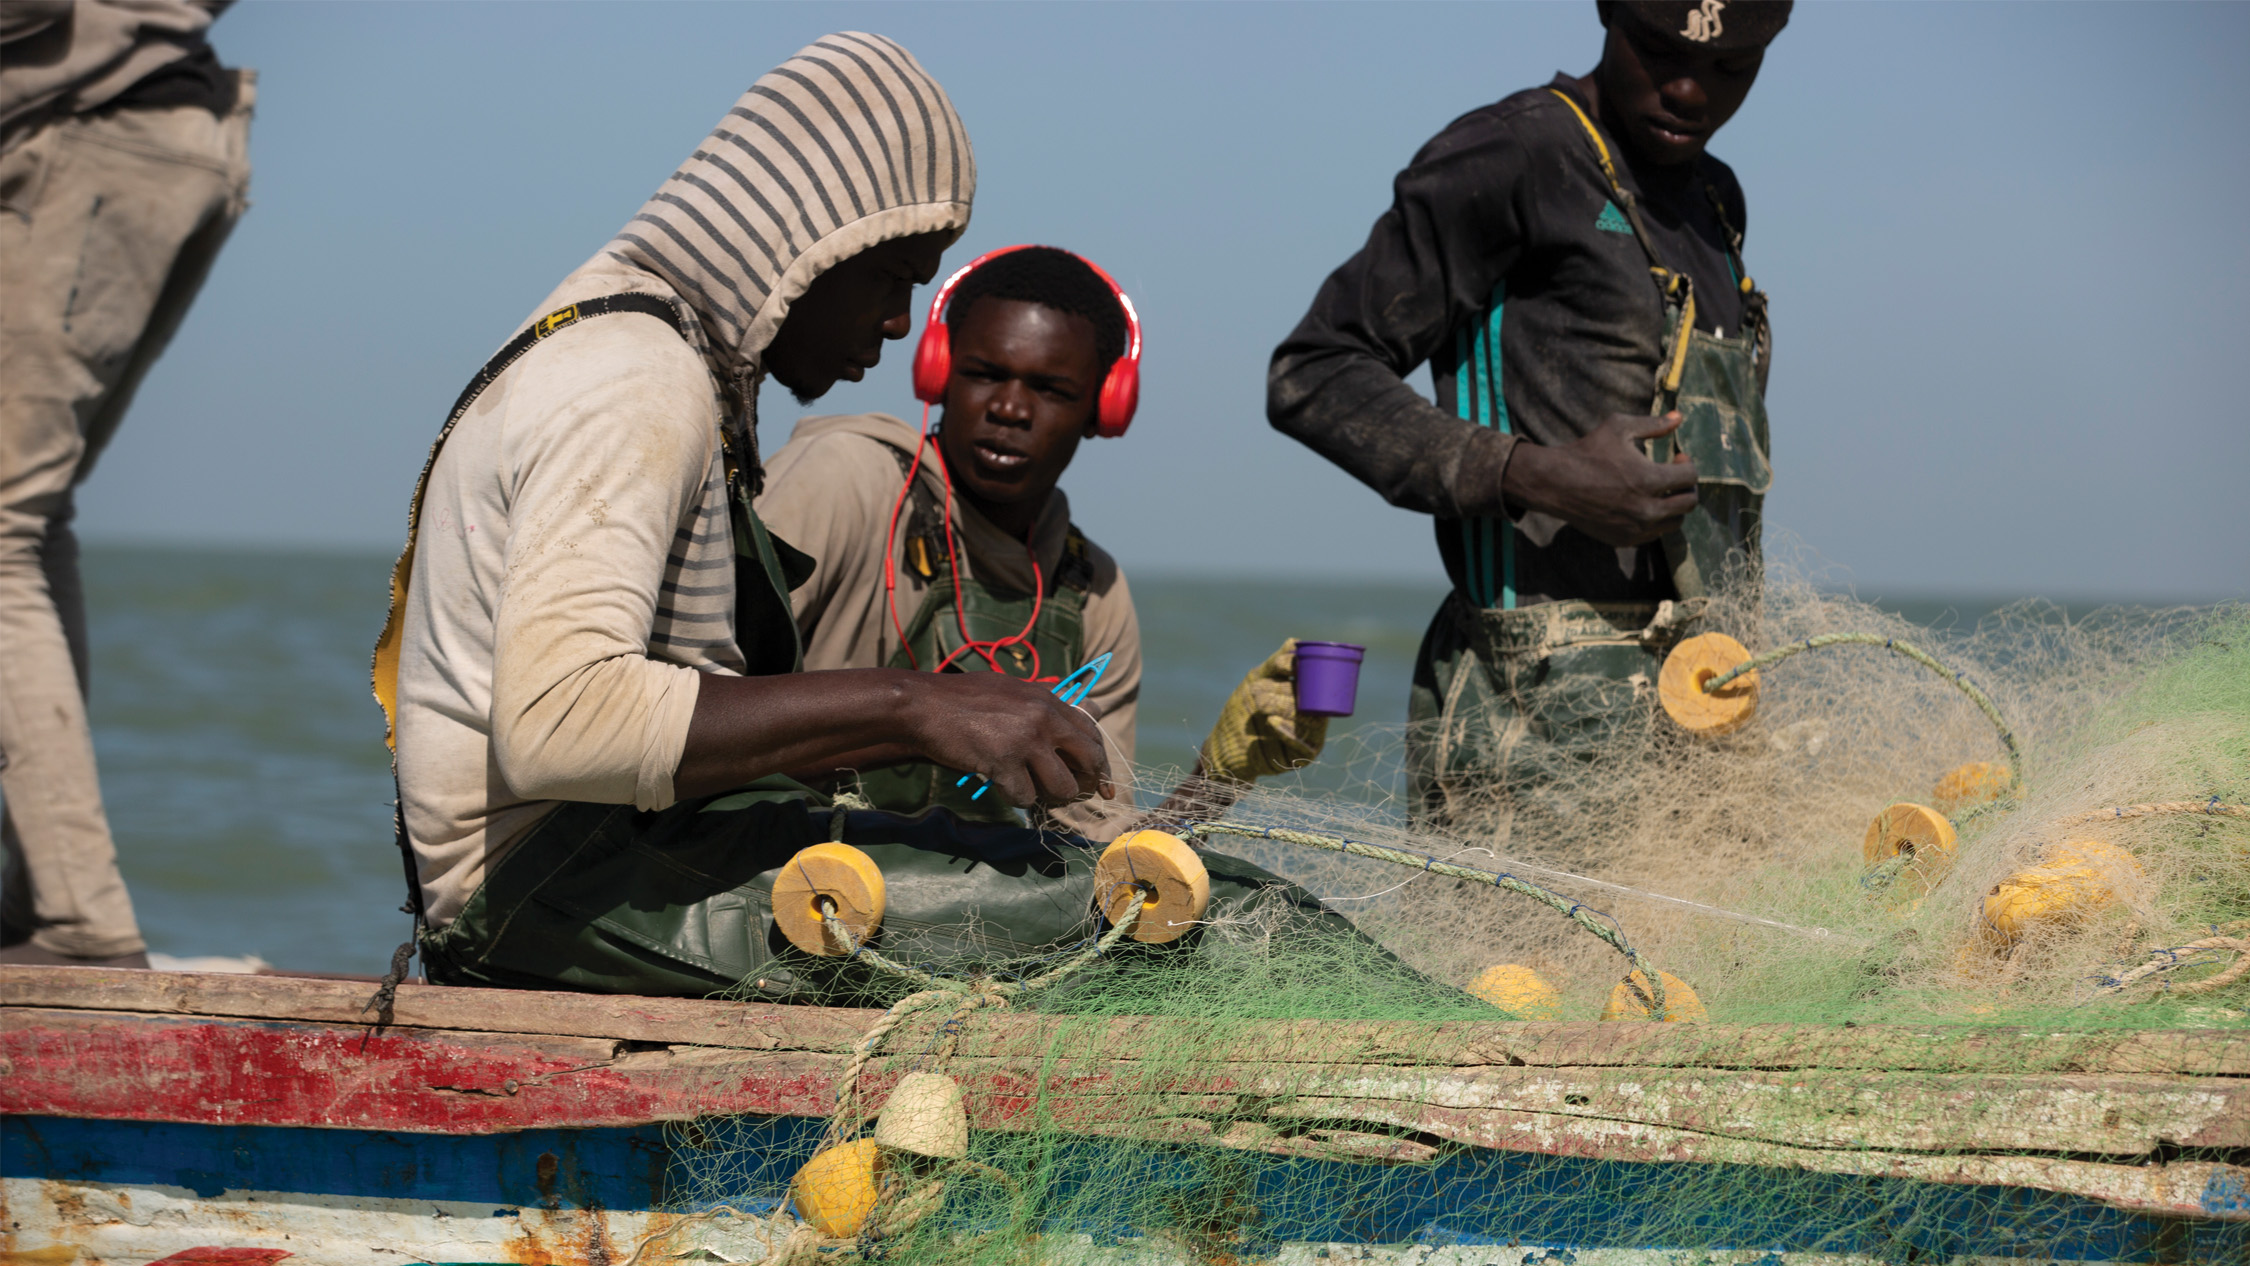 When the Sea Runs Dry: One Fishing Community's Story